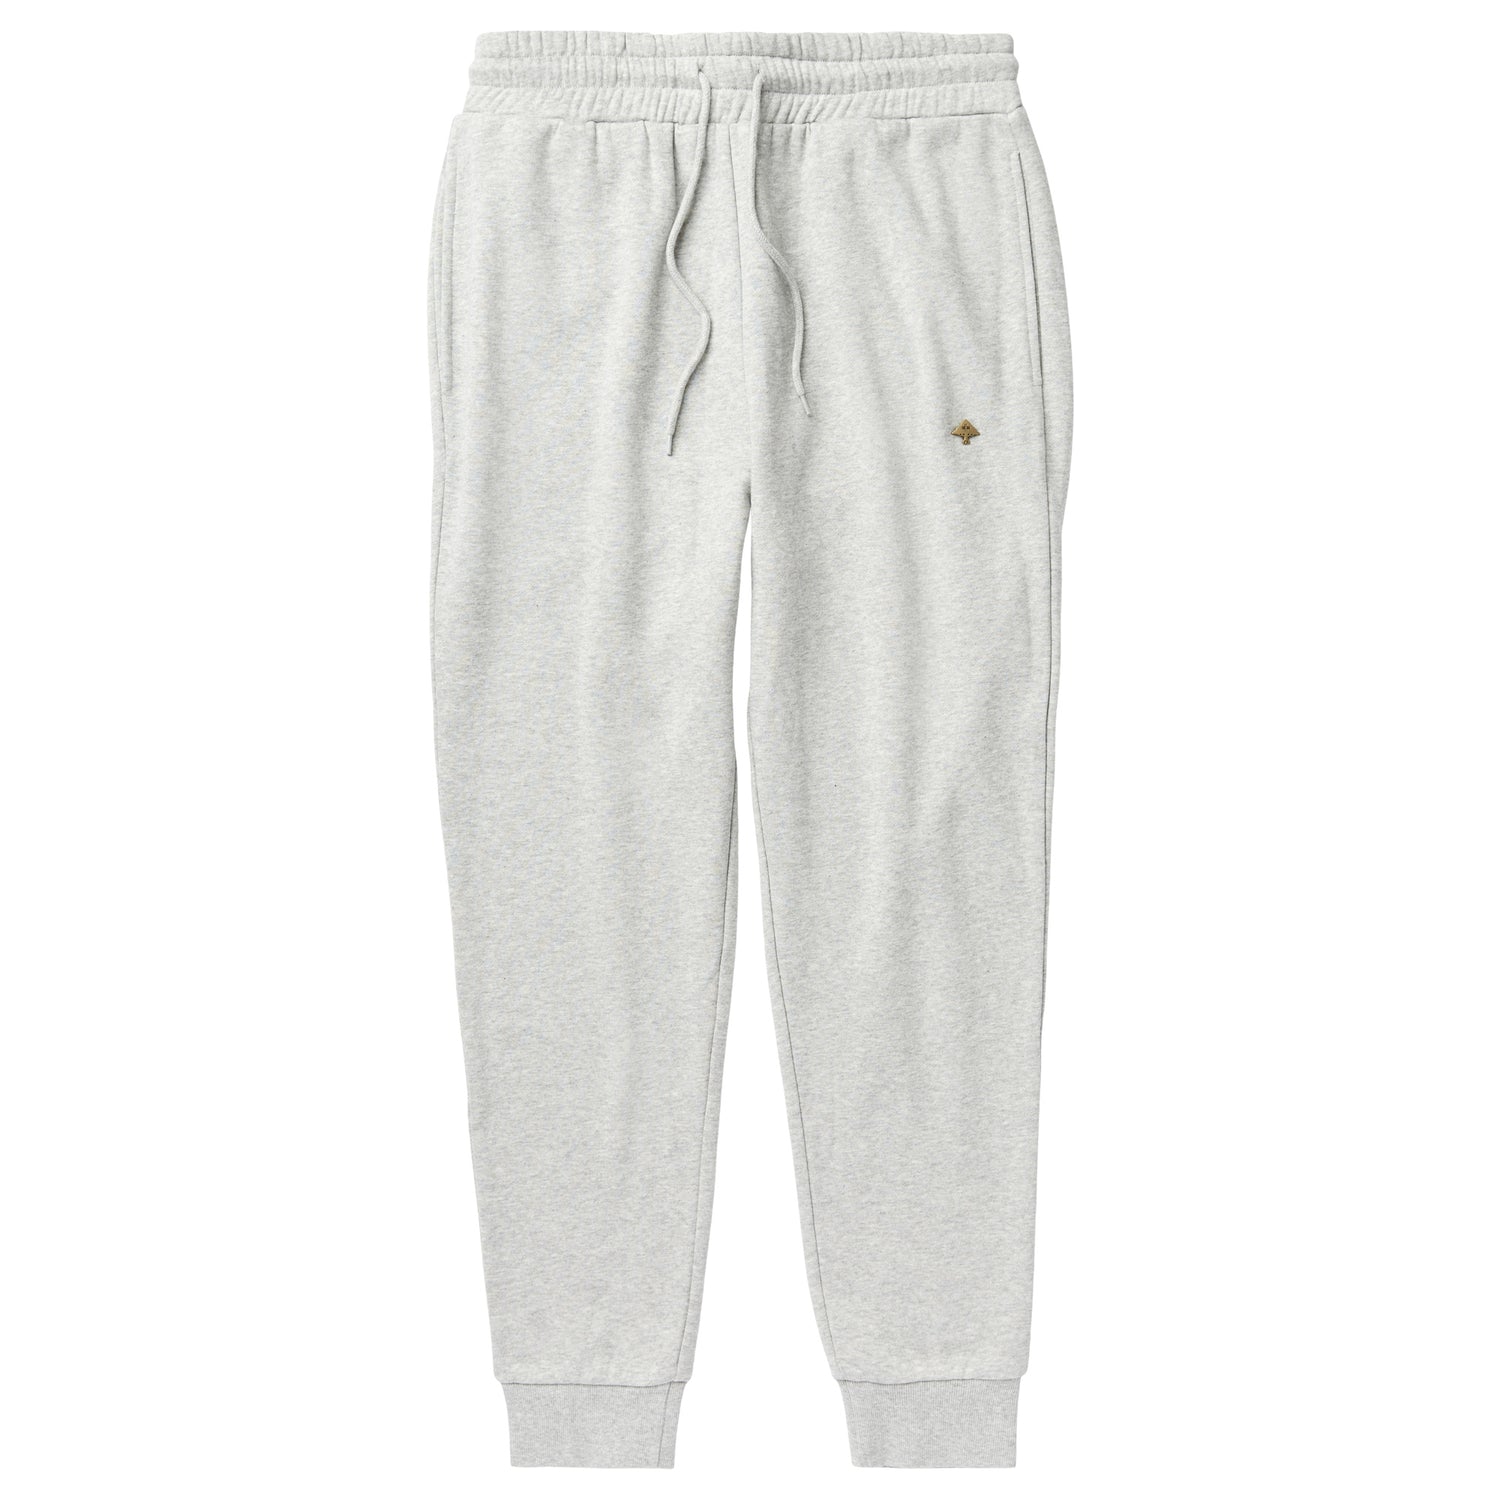 NOTHING BUT GOLD JOGGER SWEATPANTS - GREY HEATHER